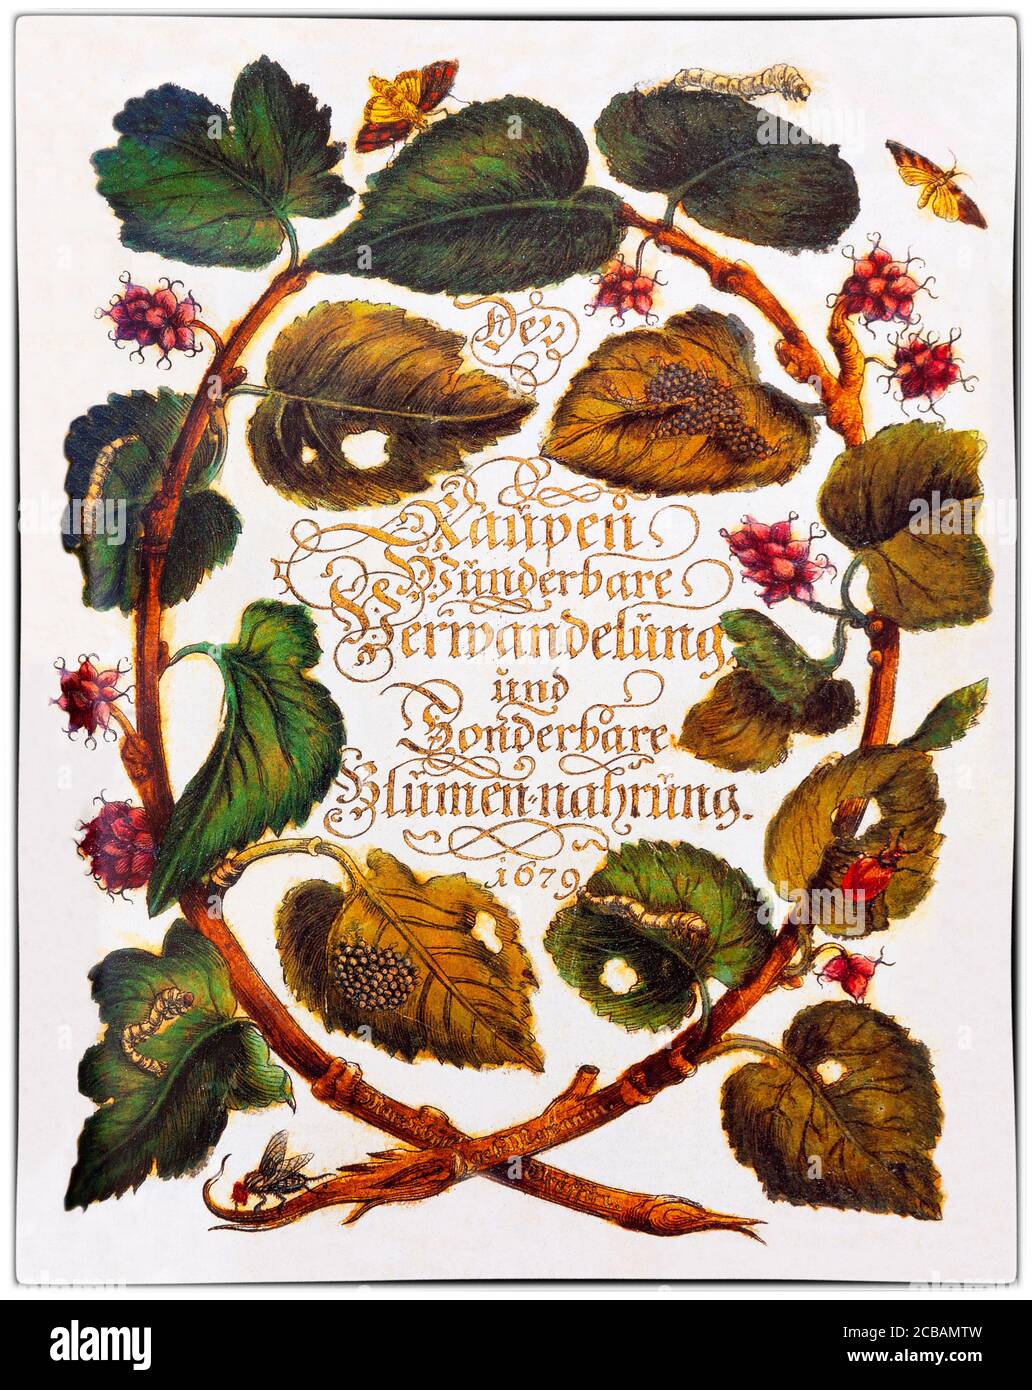 Maria Sibylla Merian (1647-1717) was a German-born naturalist and scientific illustrator, a descendant of the Frankfurt branch of the Swiss Merian family. Merian was one of the first European naturalists to observe insects directly. The illustration shows the title page to the artist's first major work, "Der Raupen wunderbare Verwandelung und sonderbare Blumennahrung" (Trans: The caterpillars' wonderful transformation and strange flower food) Stock Photo